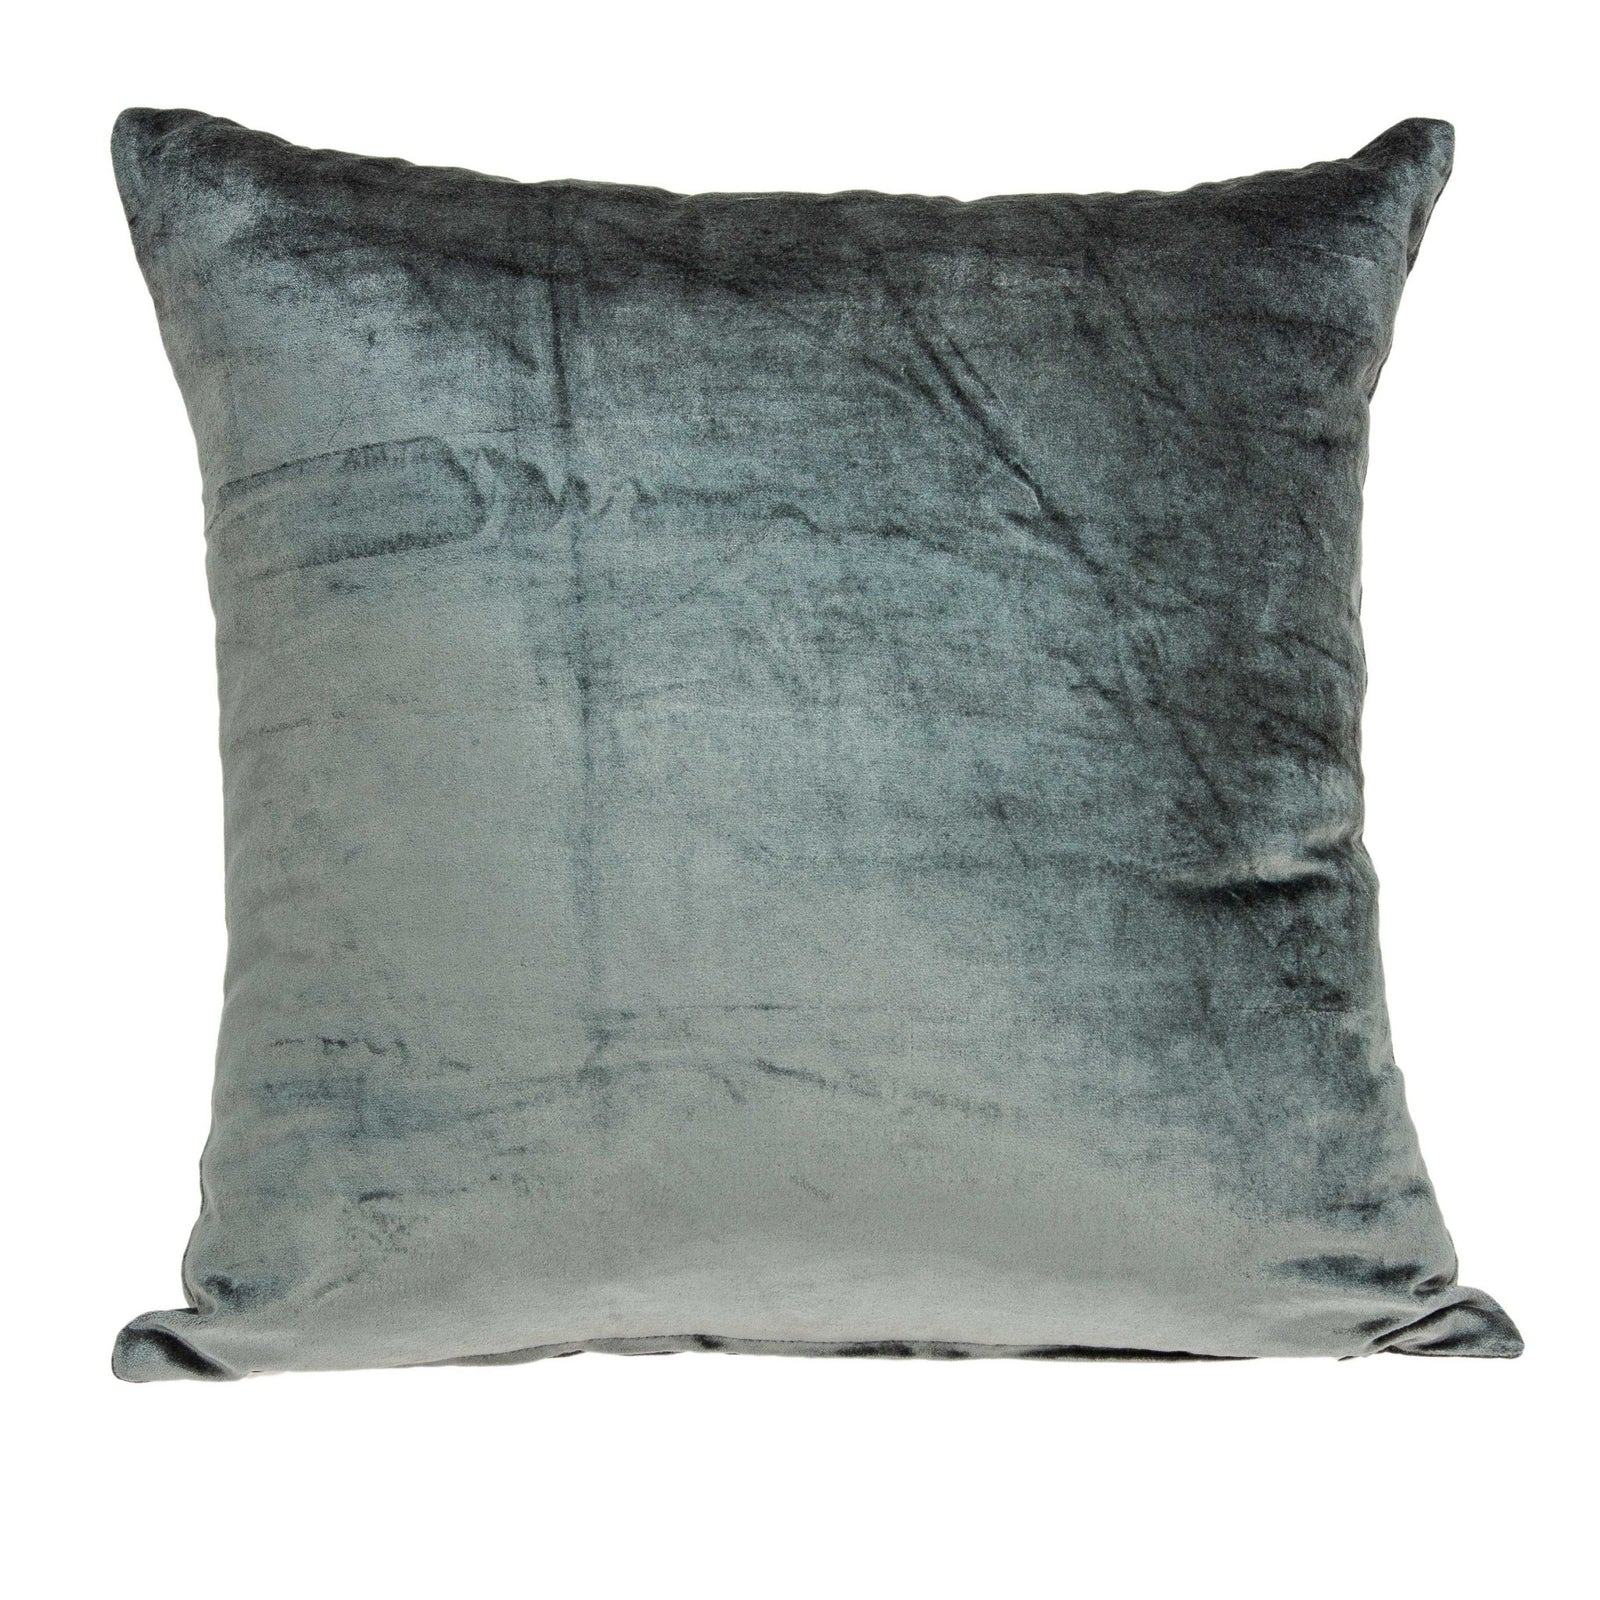 18" X 7" X 18" Transitional Charcoal Solid Pillow Cover With Poly Insert